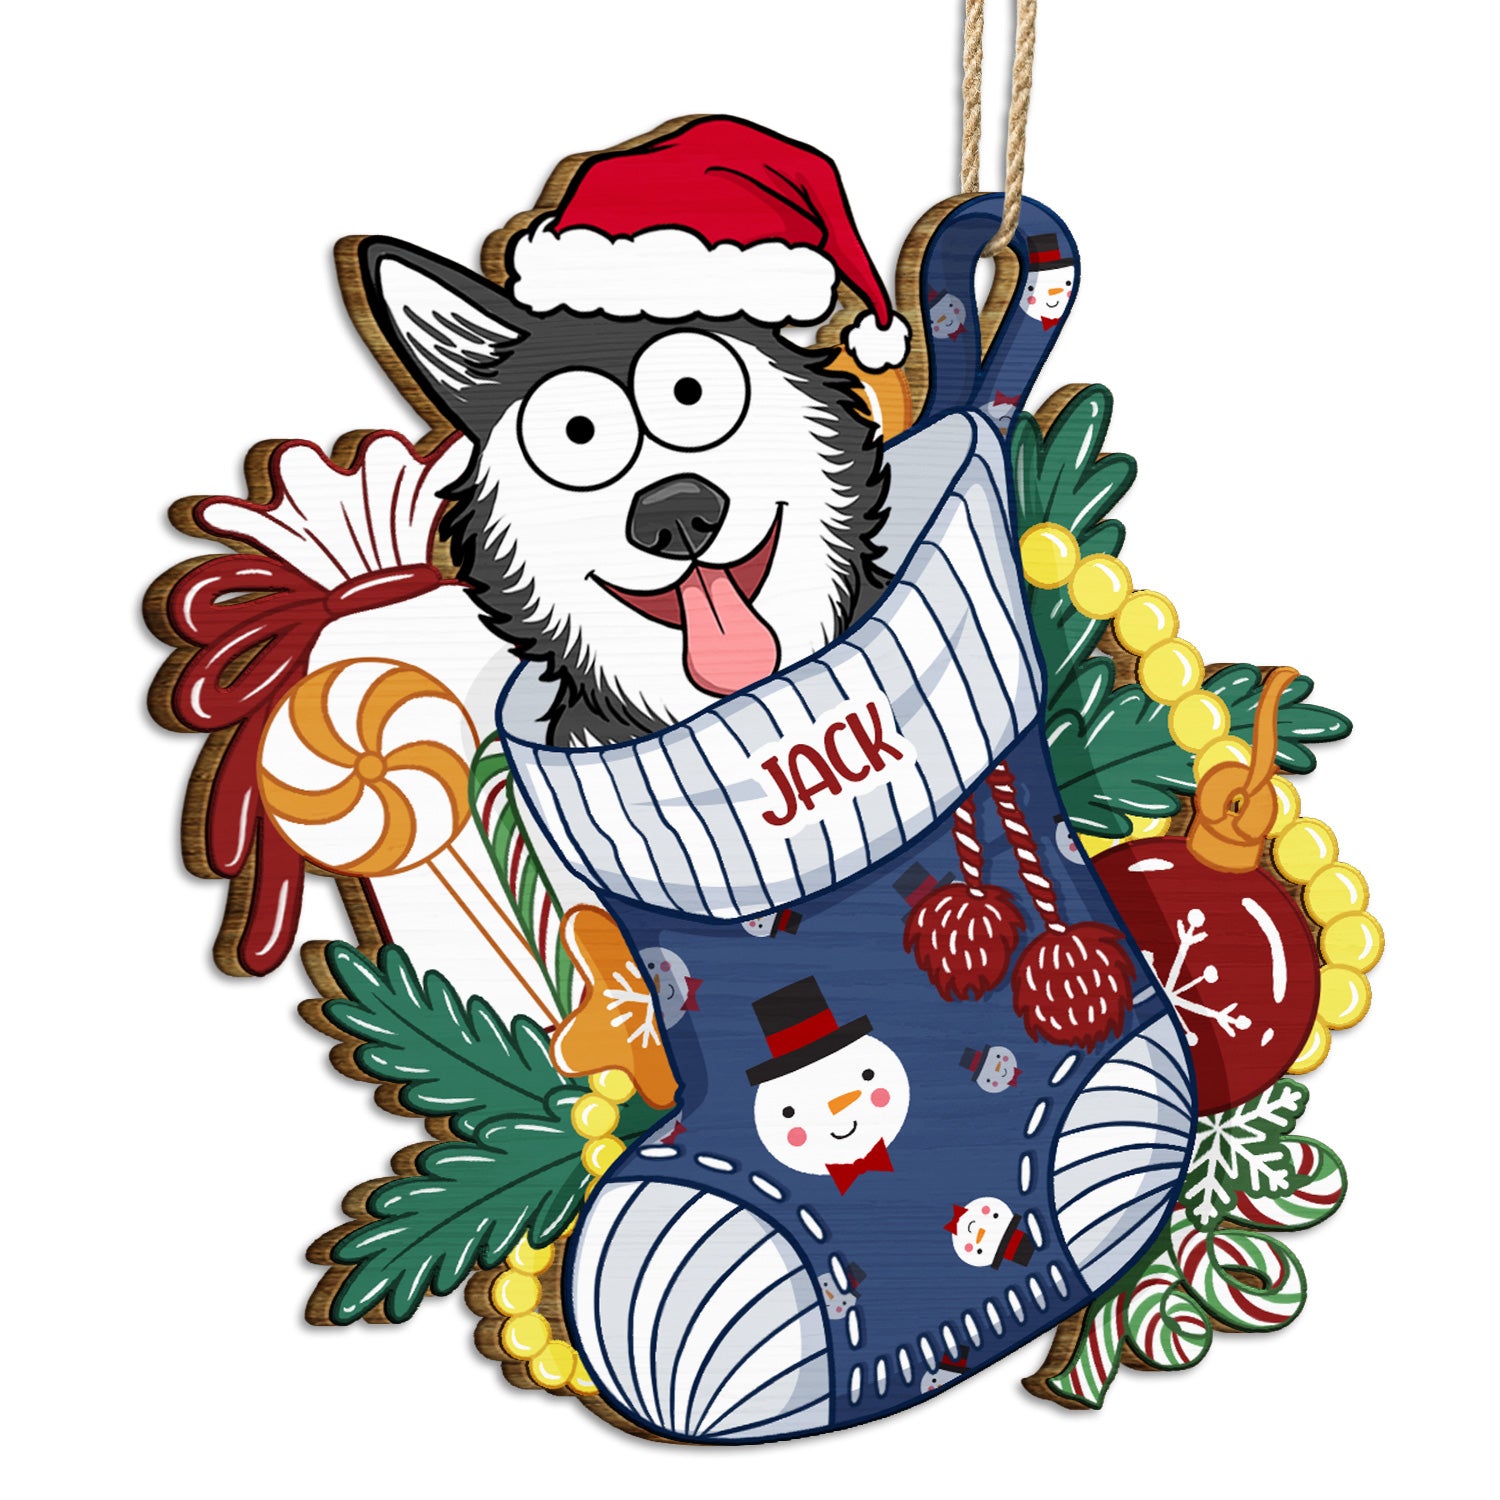 Dogs In Stocking Xmas Pattern - Christmas Gift For Dog Lovers - Personalized Wooden Cutout Ornament